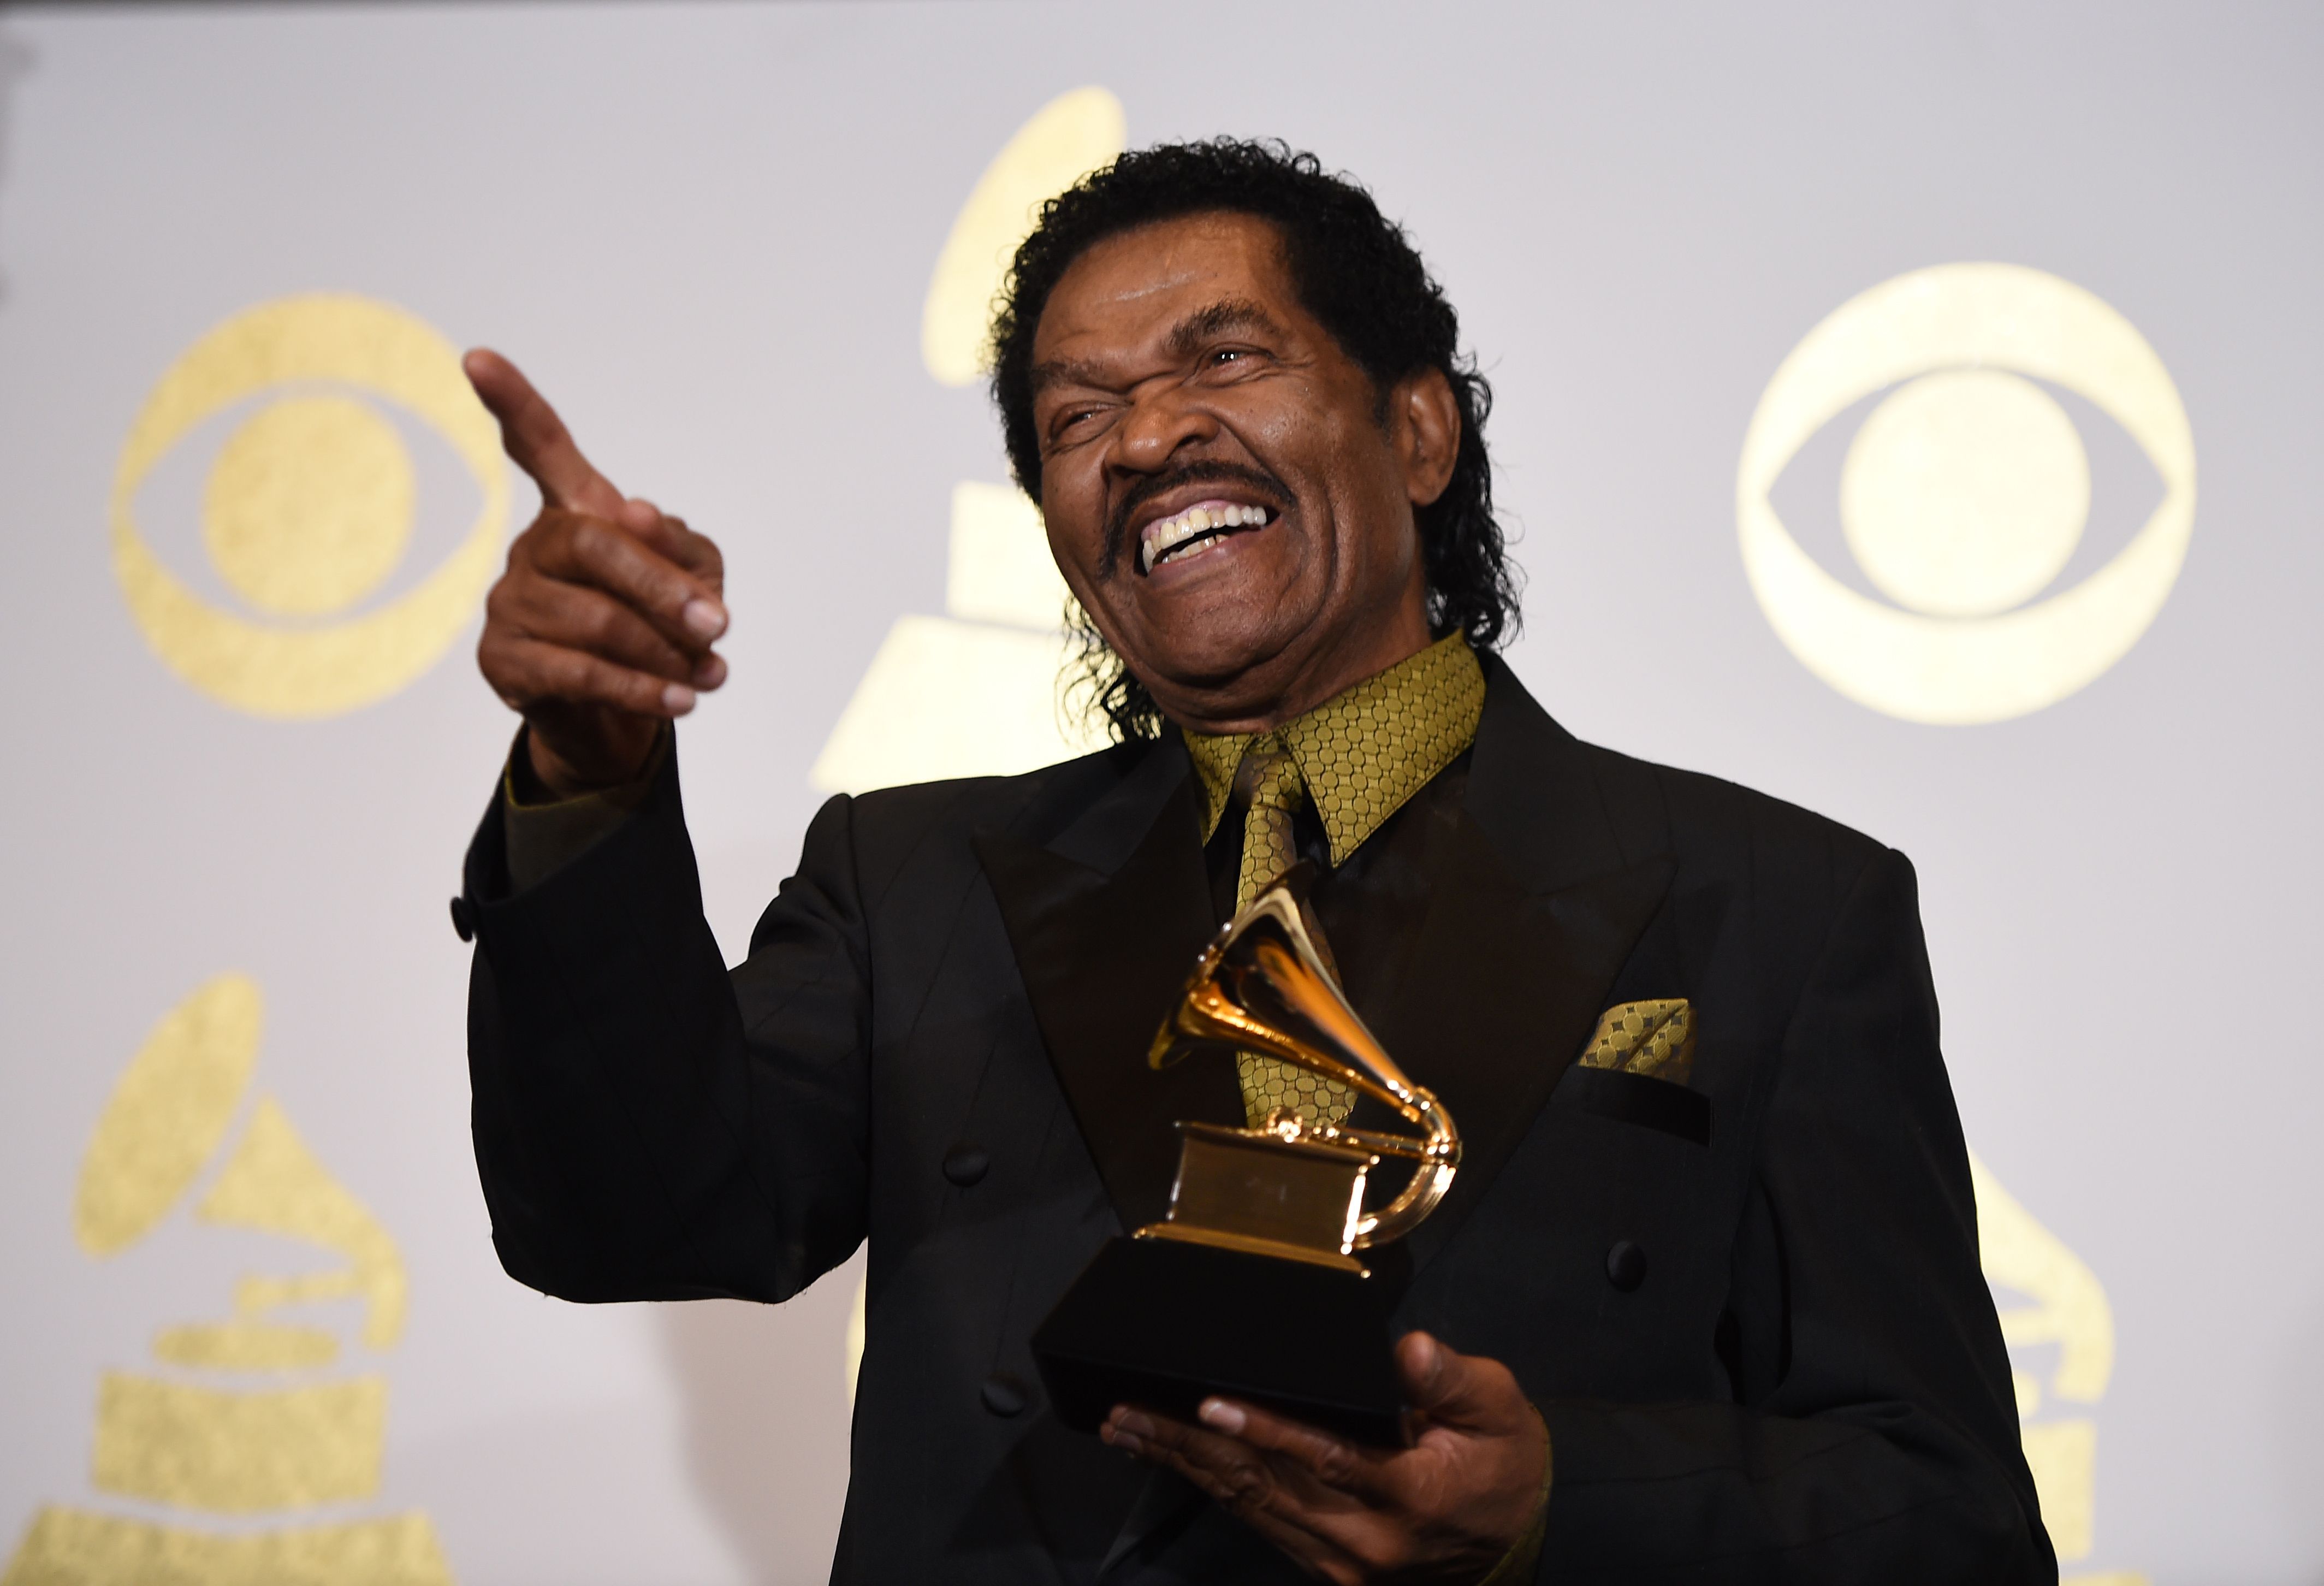 Louisiana native, blues legend Bobby Rush wins first Grammy at age 83